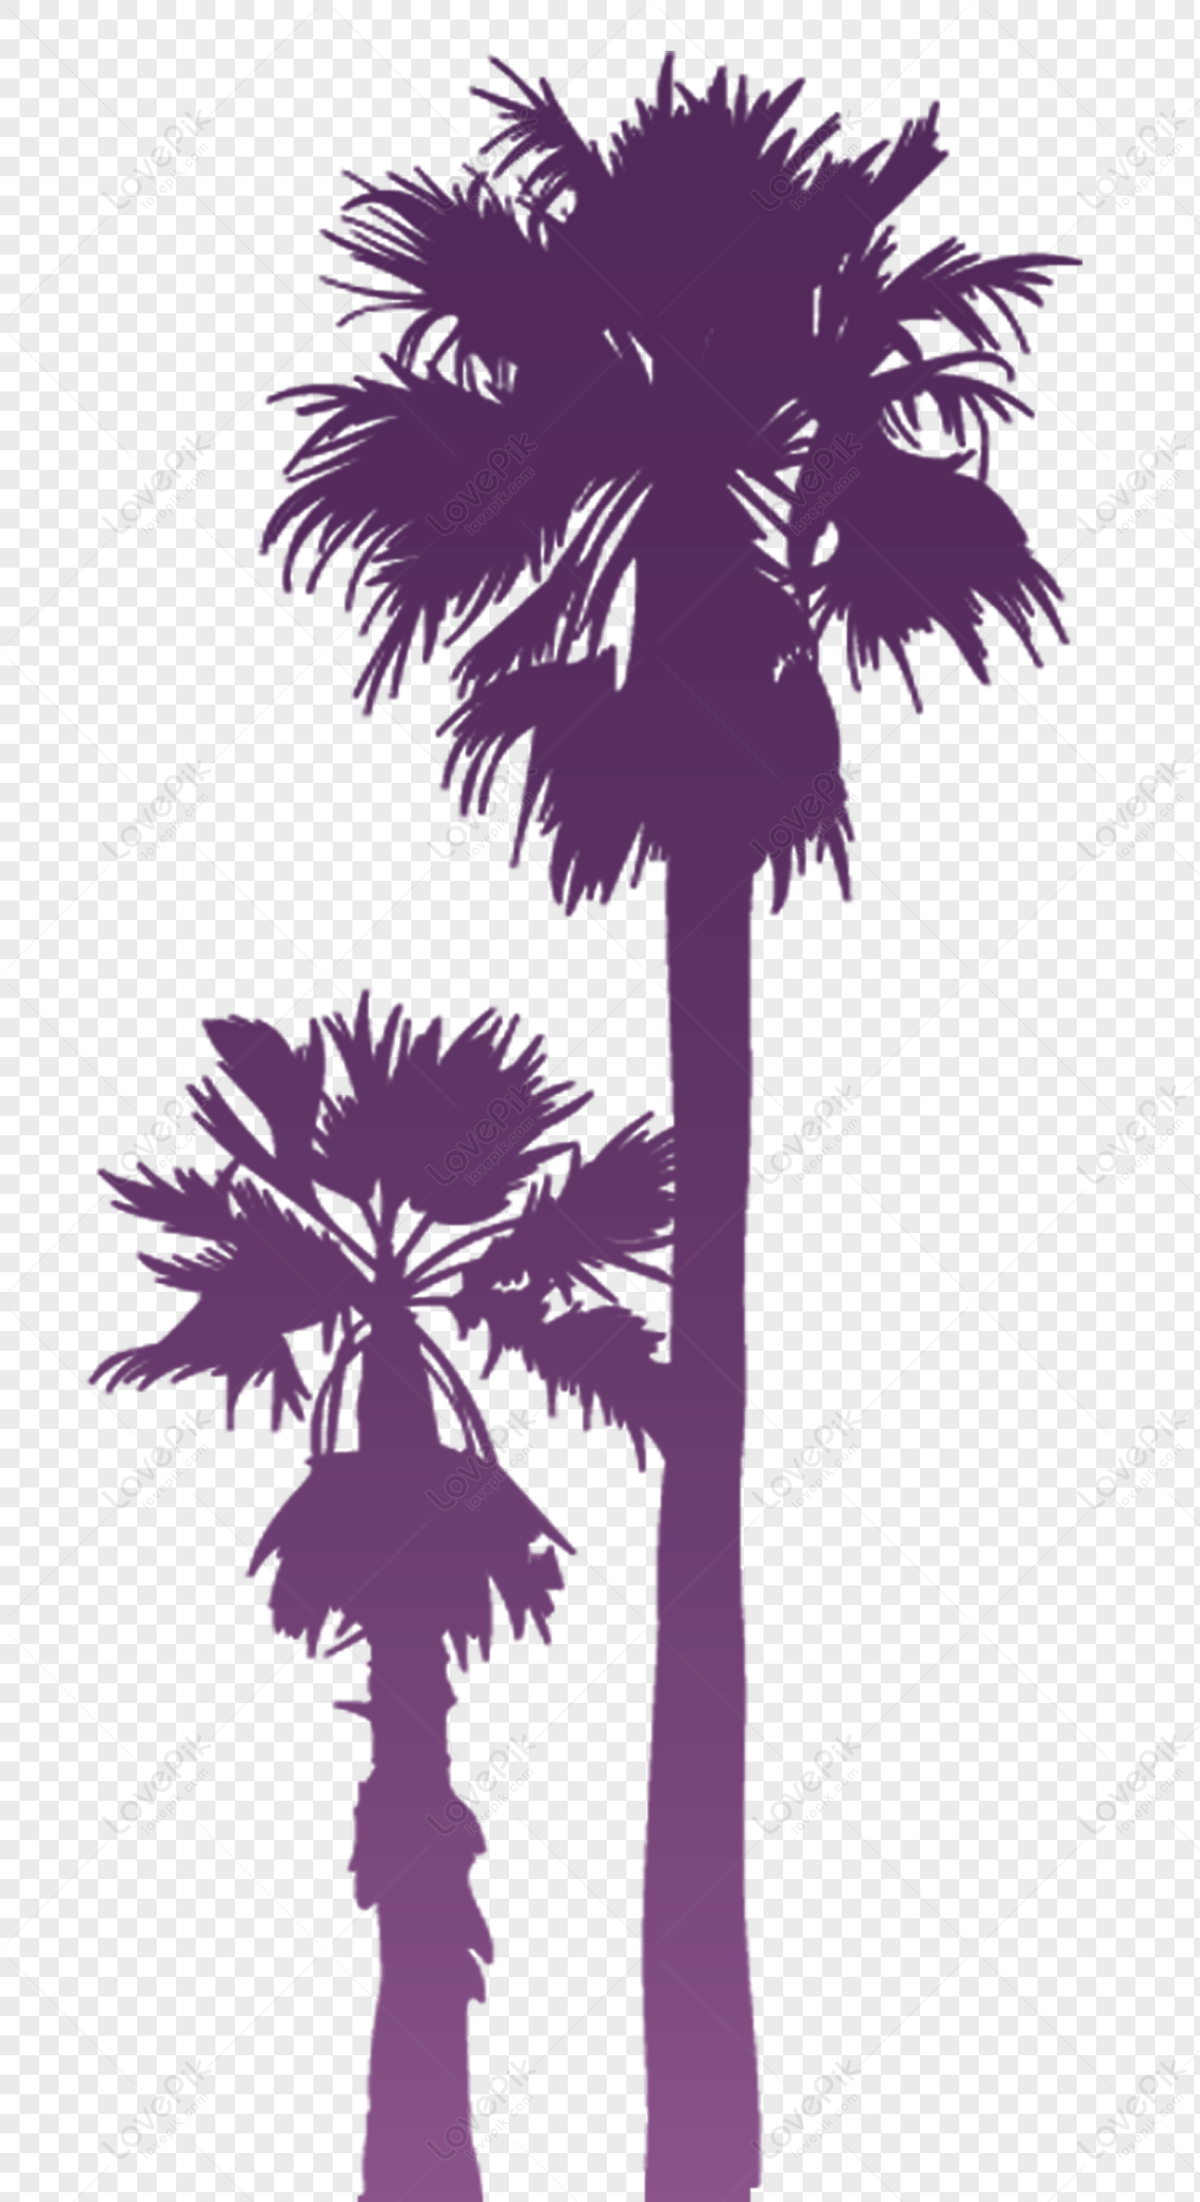 Coconut tree silhouette, tree, material, california silhouette png transparent background